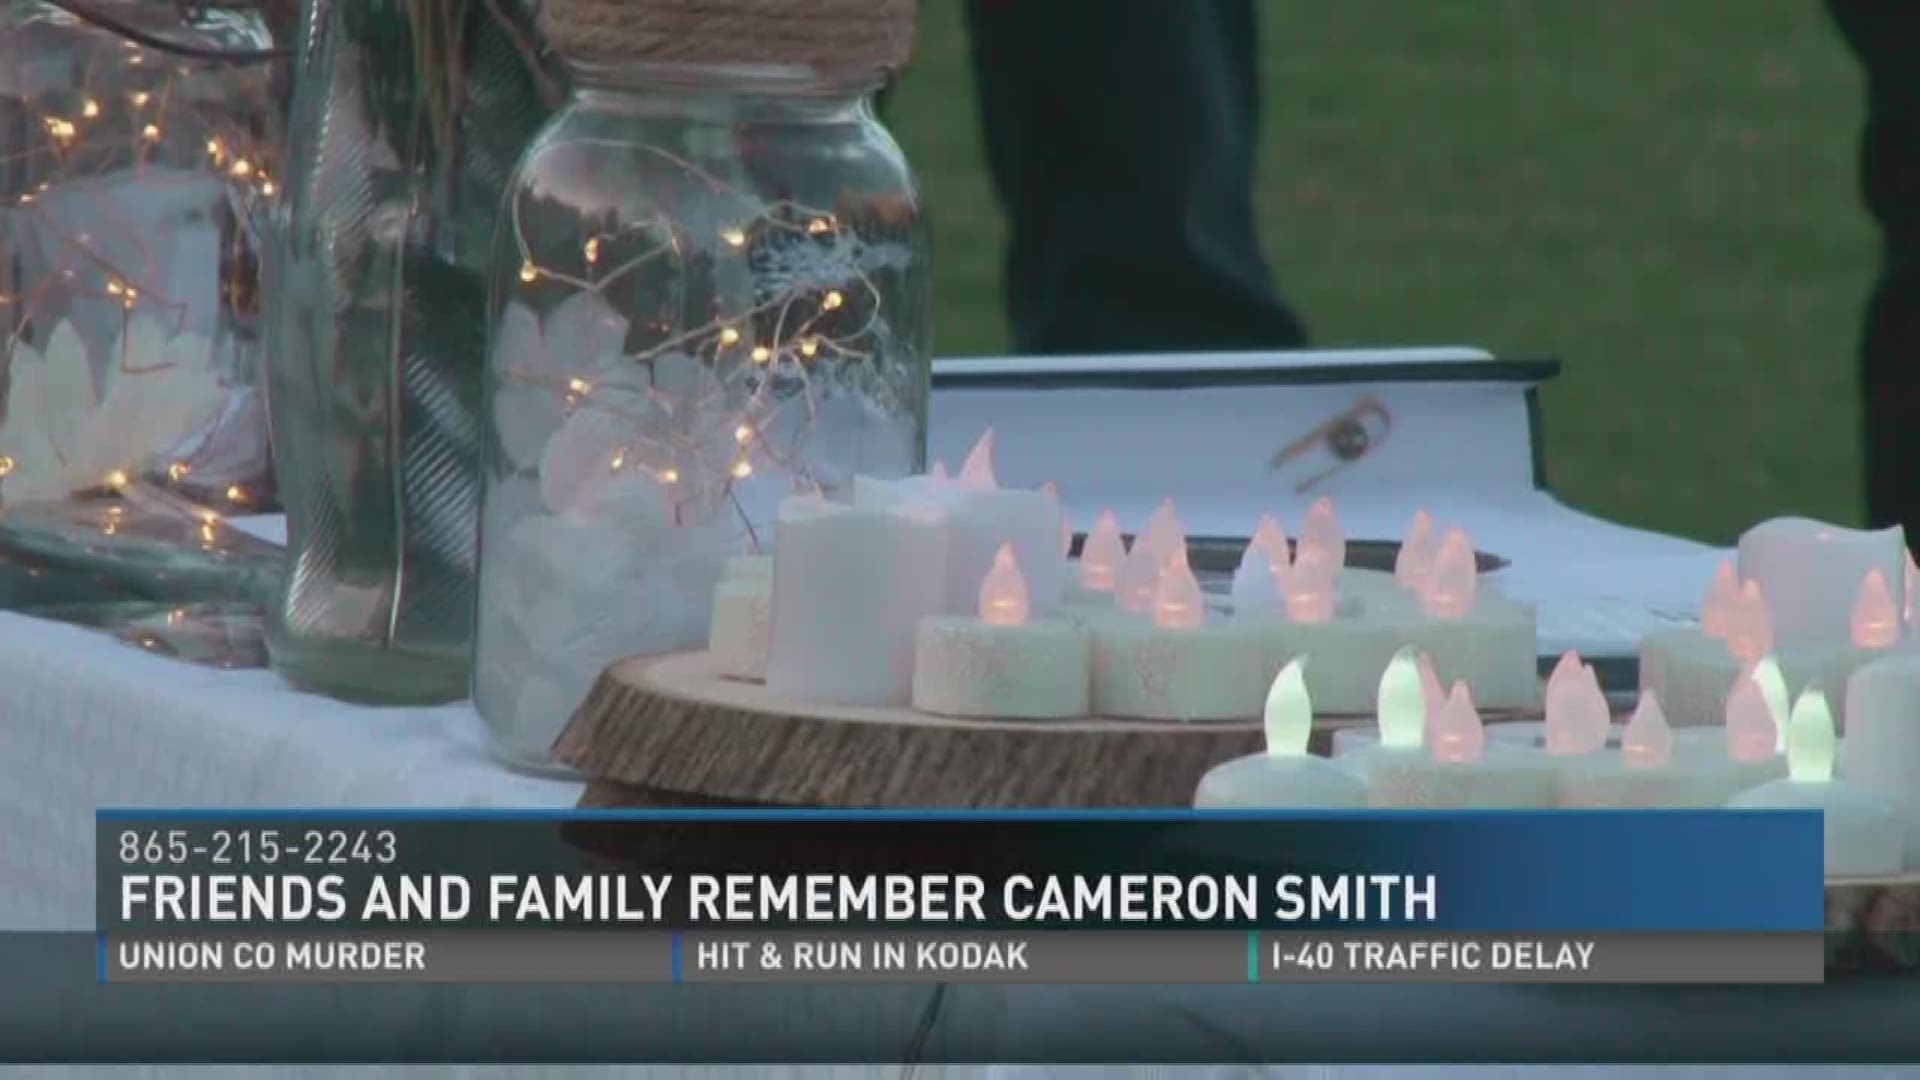 Friends and family remember Cameron Smith at World's Fair Park in downtown Knoxville.